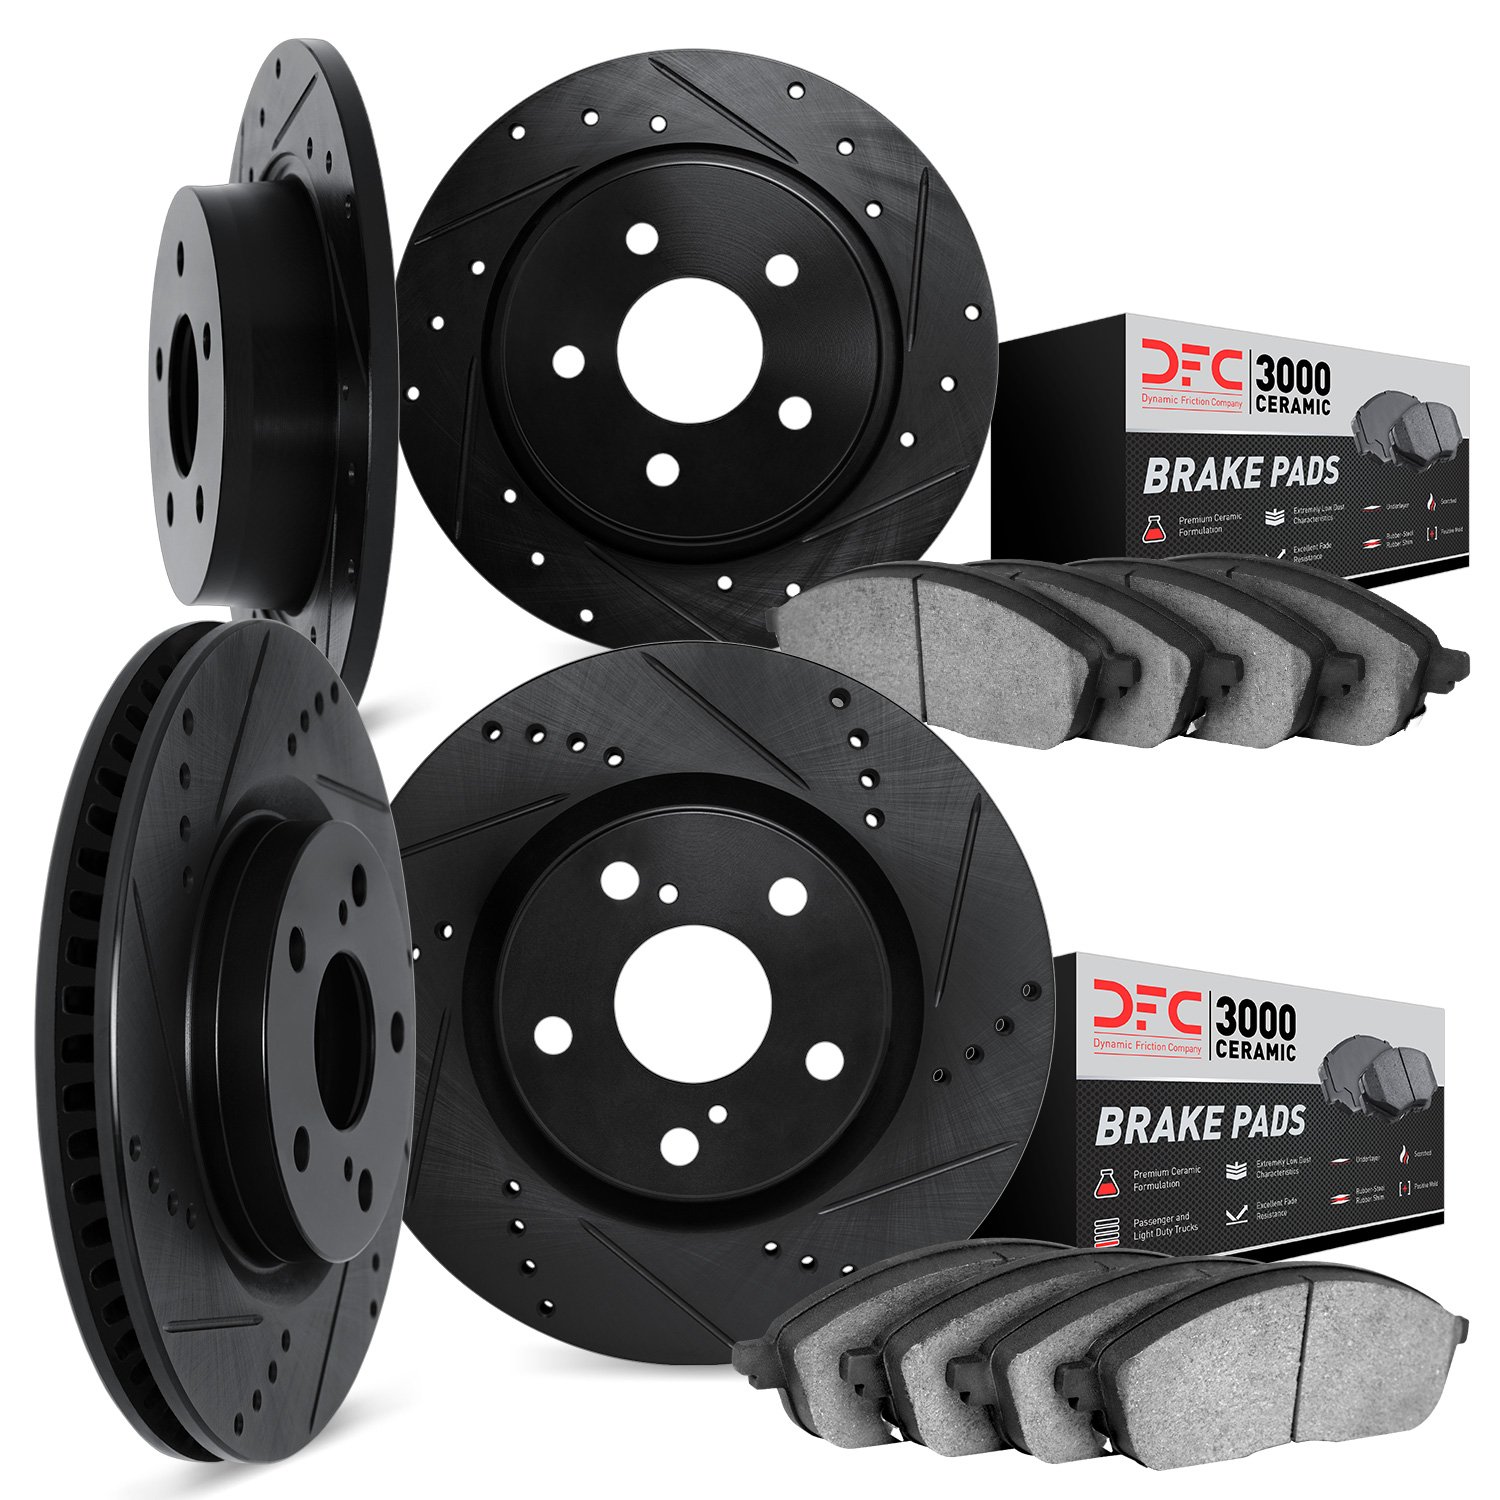 8304-59064 Drilled/Slotted Brake Rotors with 3000-Series Ceramic Brake Pads Kit [Black], 2015-2017 Acura/Honda, Position: Front